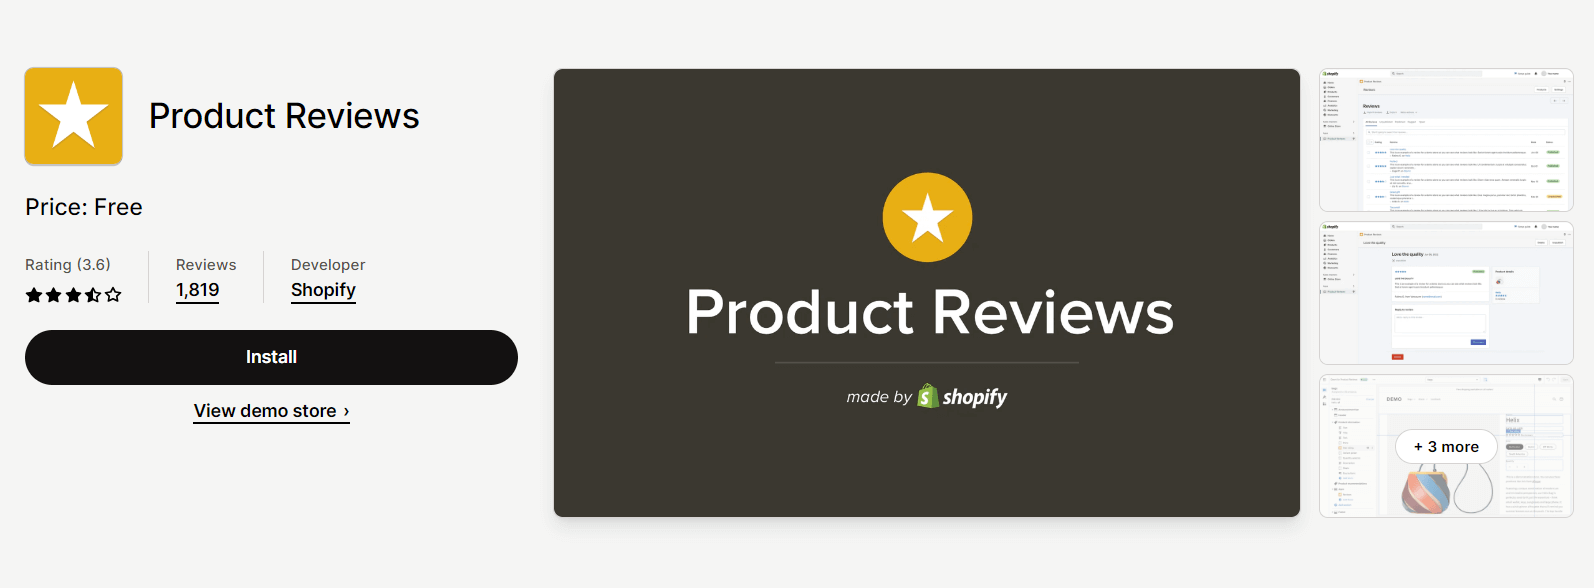 Shopify social proof apps - Product Reviews